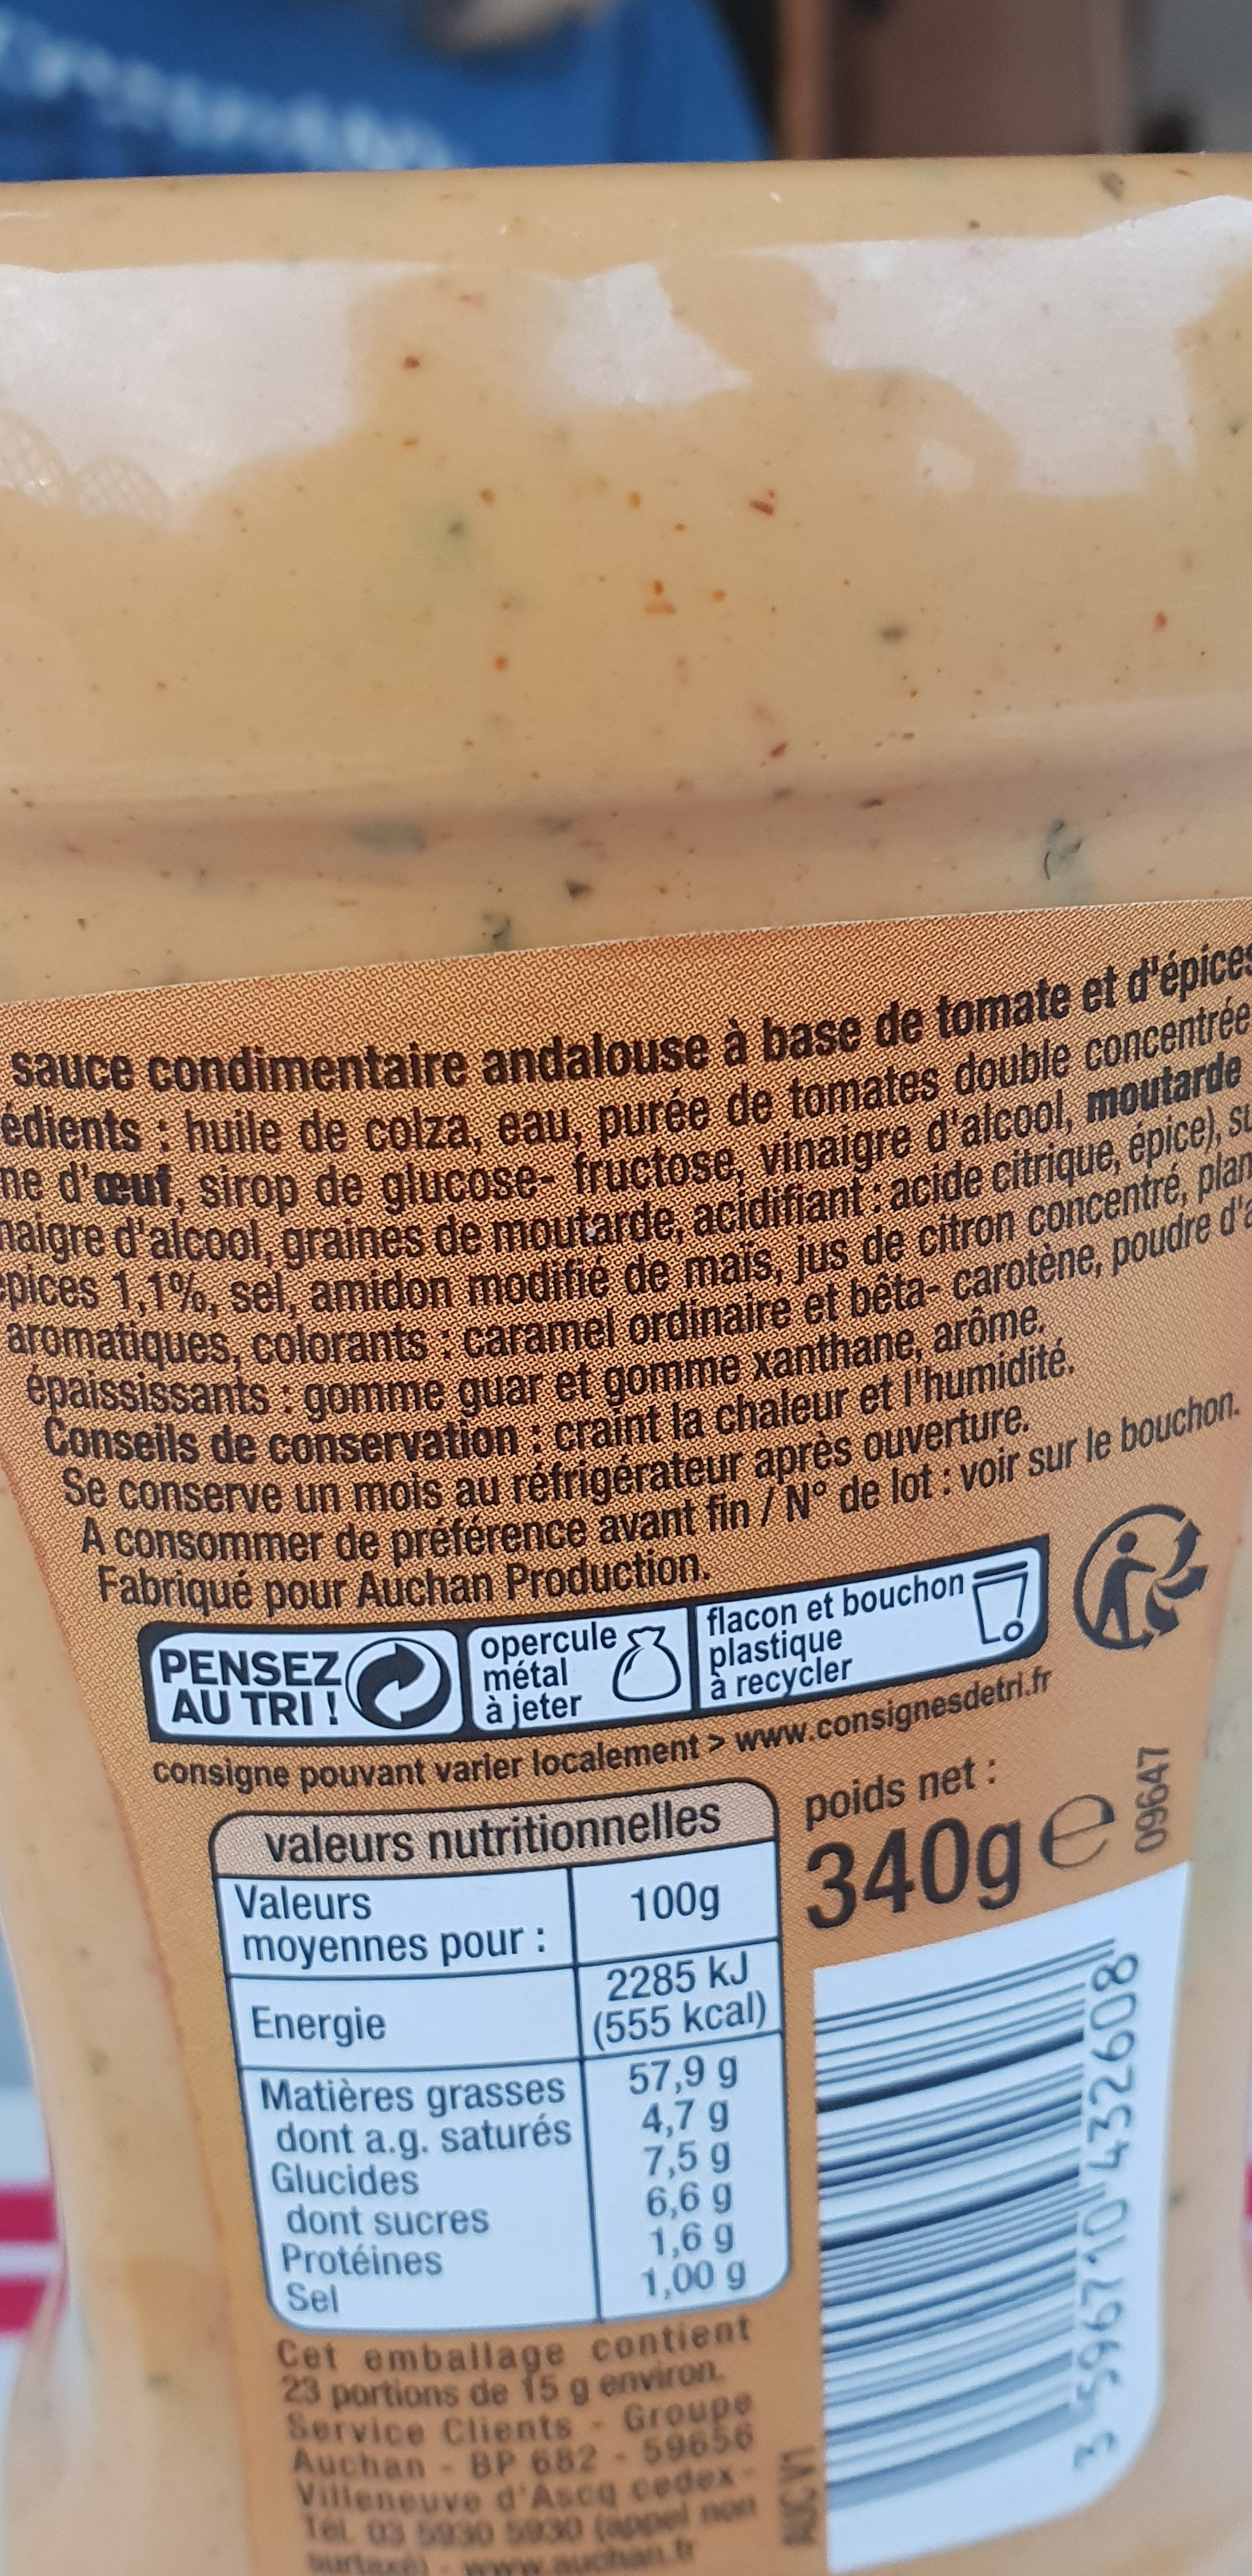 Sauce andalouse - Ingredients - fr